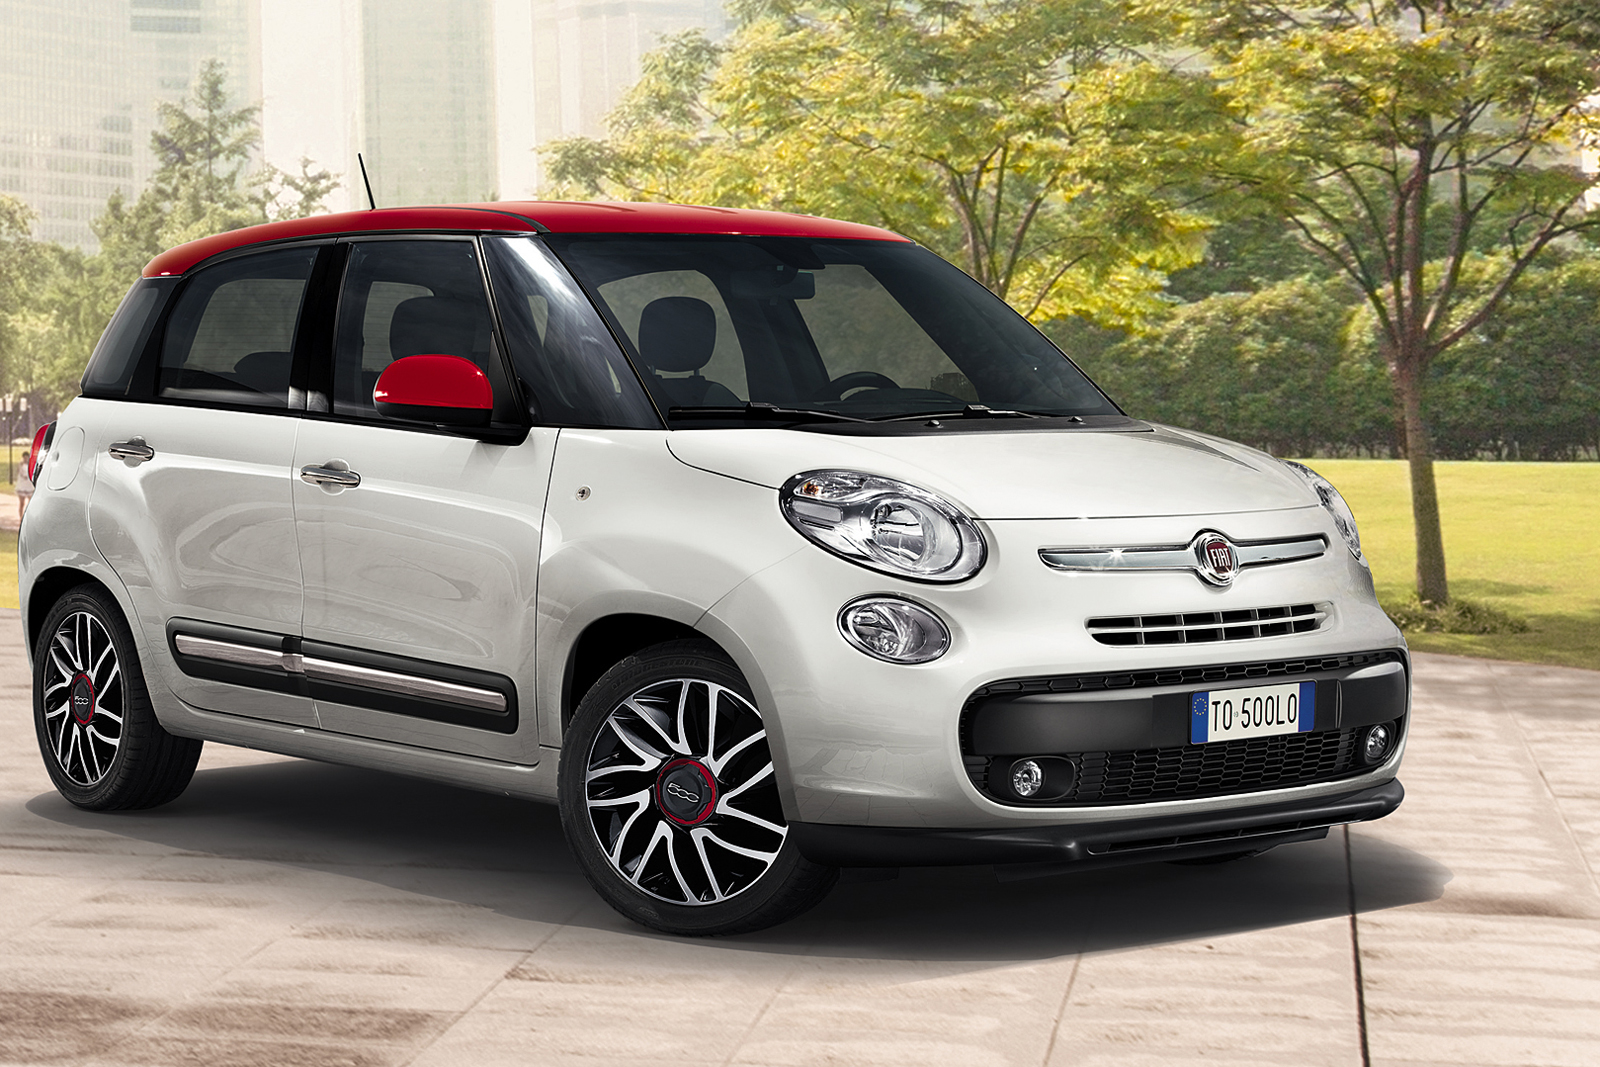 Italy Gets New Fiat 500L Urban Edition Specials Carscoops